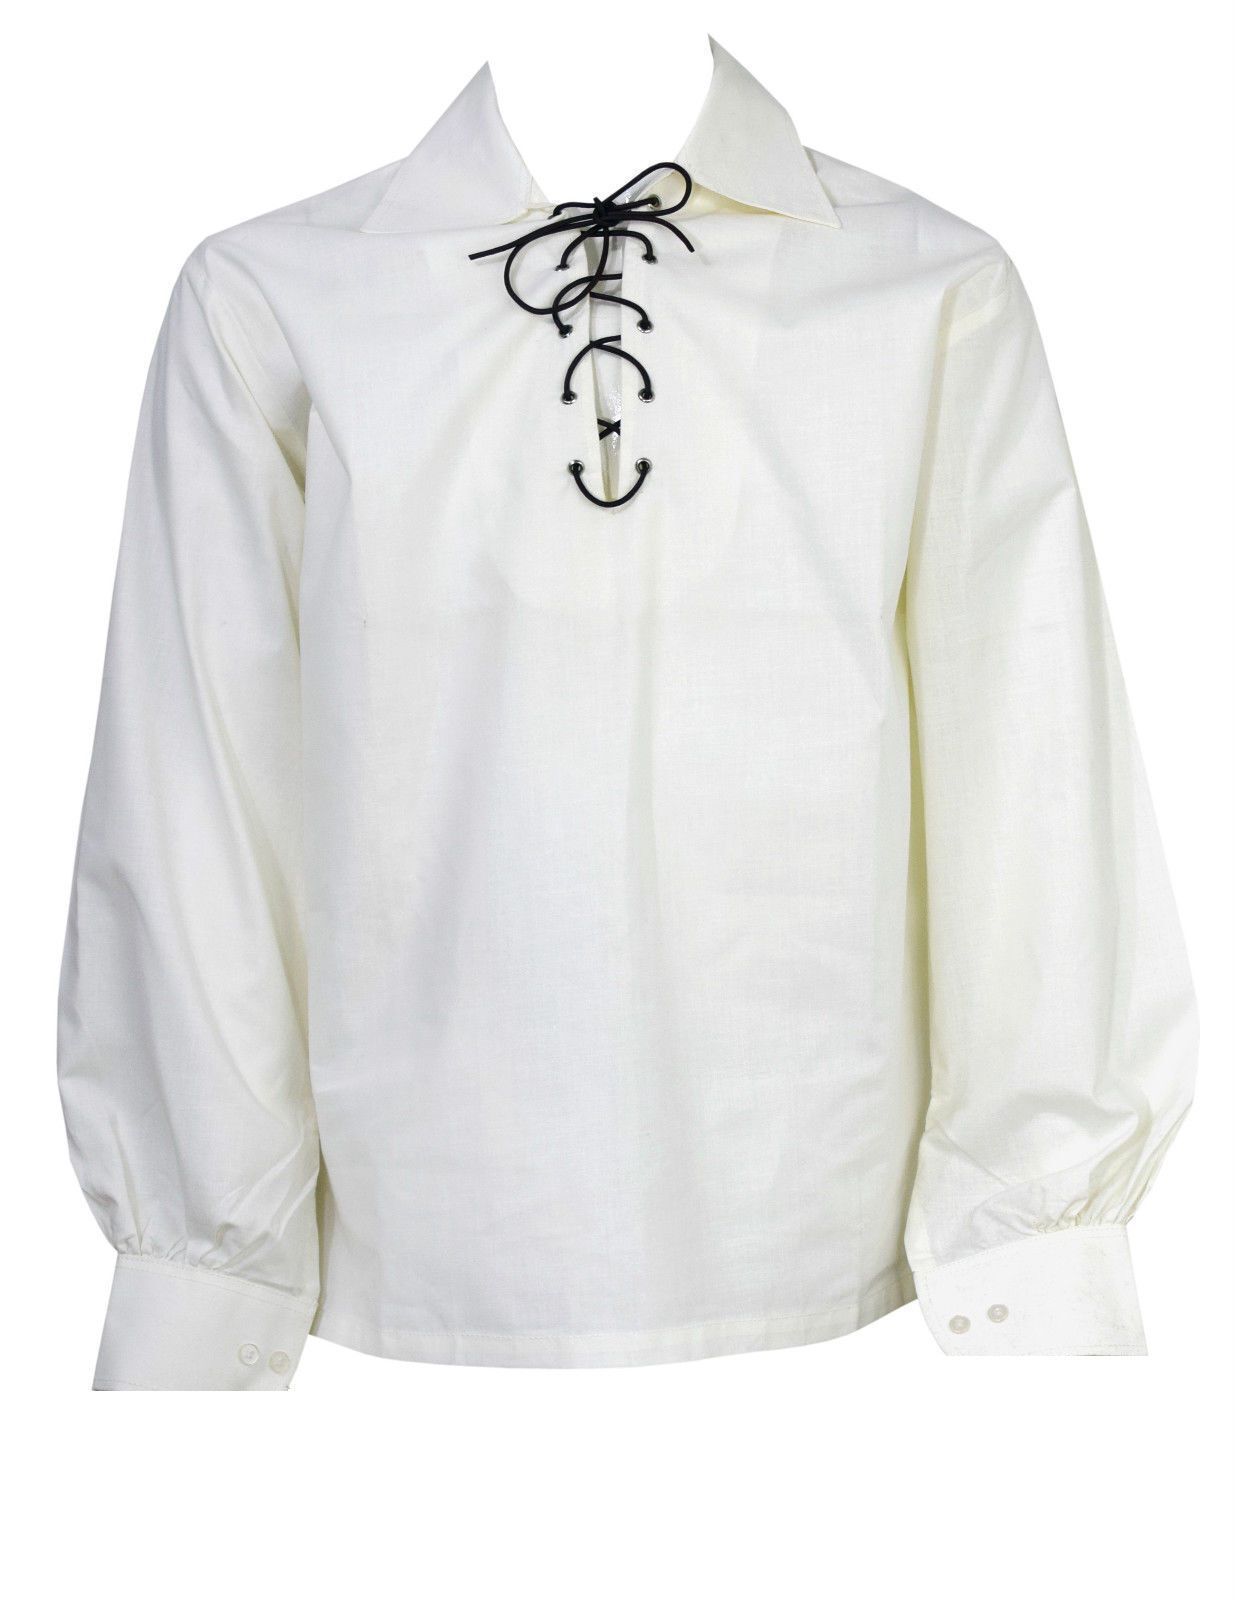 Jacobite Highland Shirt Open neck with leather thong lace up